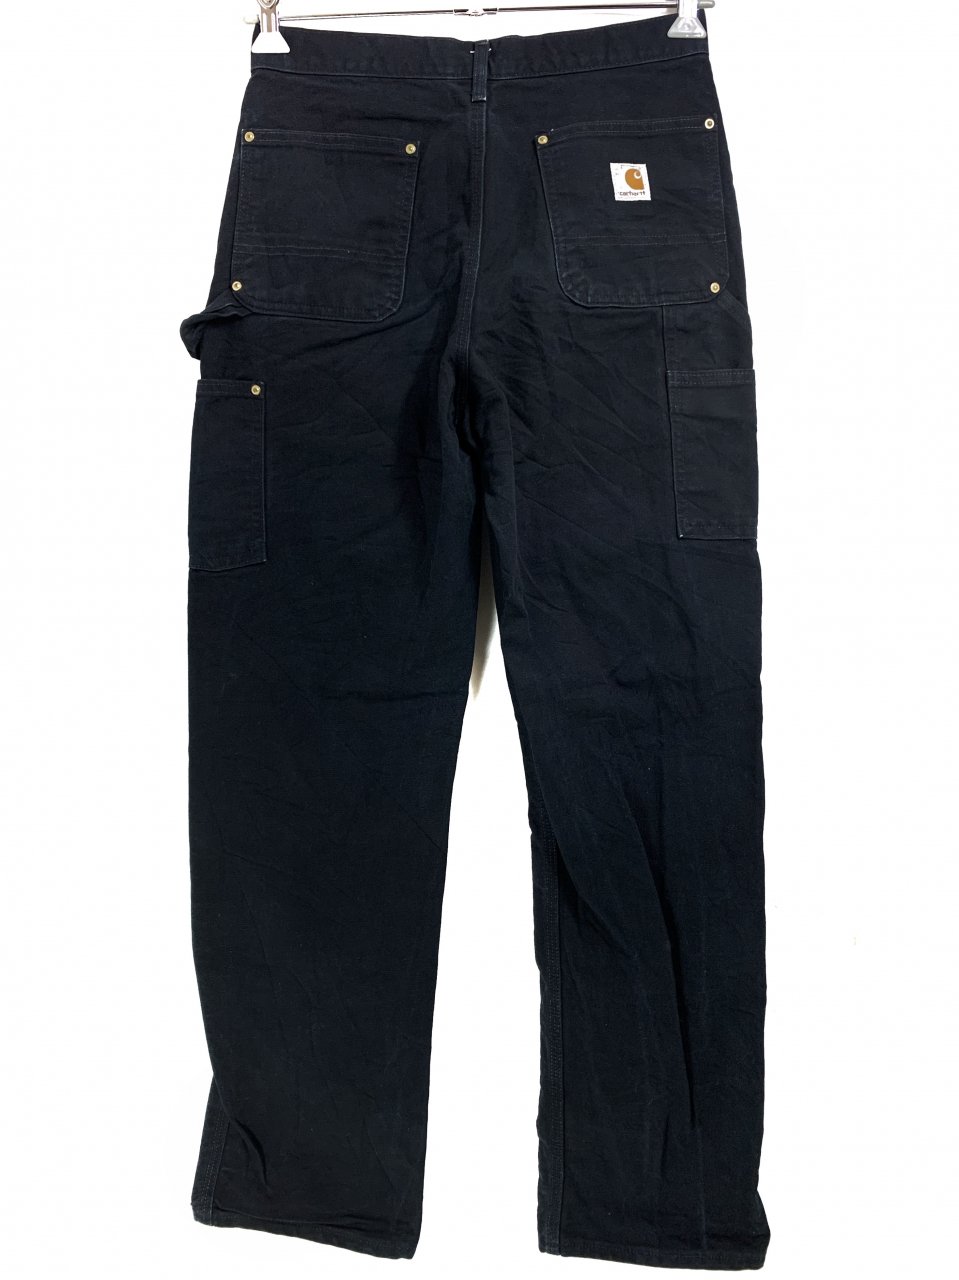 USA製 Carhartt Firm Duck Double-Front Work Dungaree 黒 30×32 